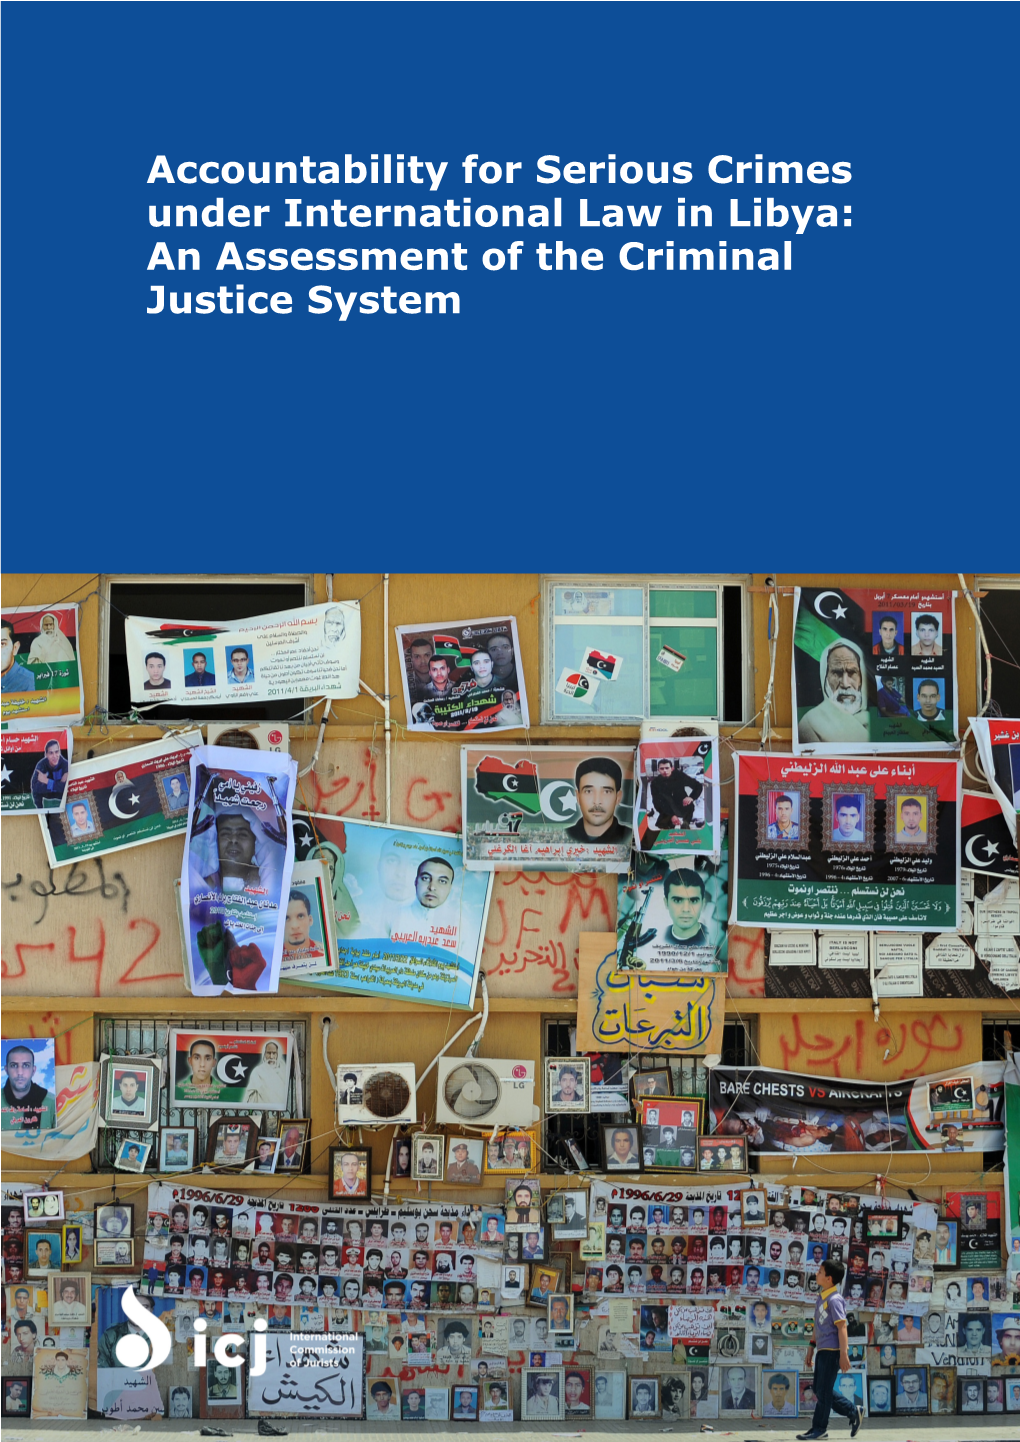 Accountability for Serious Crimes Under International Law in Libya: an Assessment of the Criminal Justice System